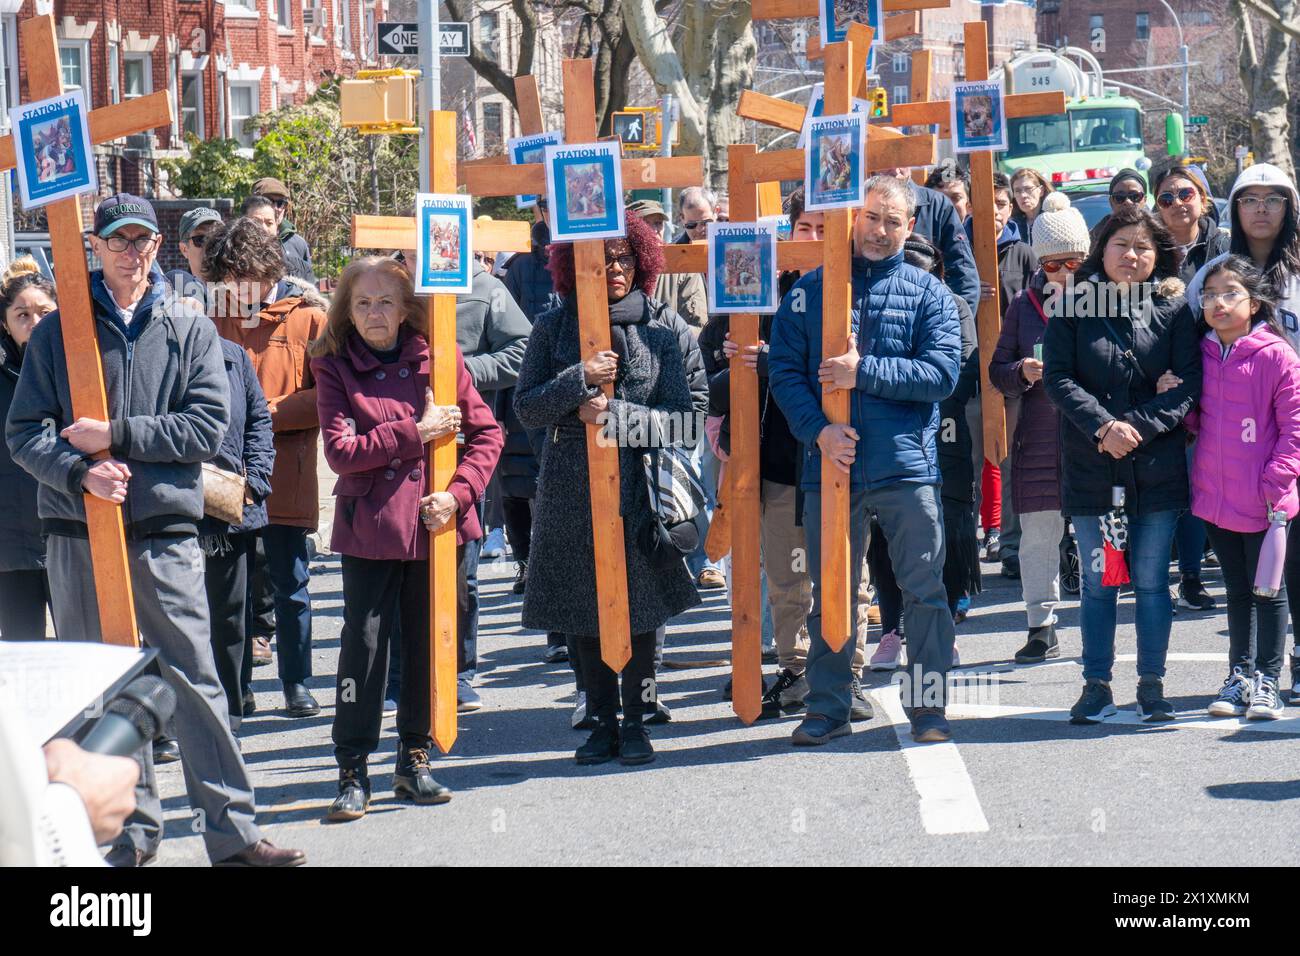 Good Friday 'Way of the Cross' procession from Imacculate Heart of Mary Catholic Church in the Windsor Terrace neighborhood of Brooklyn, New York. Stock Photo